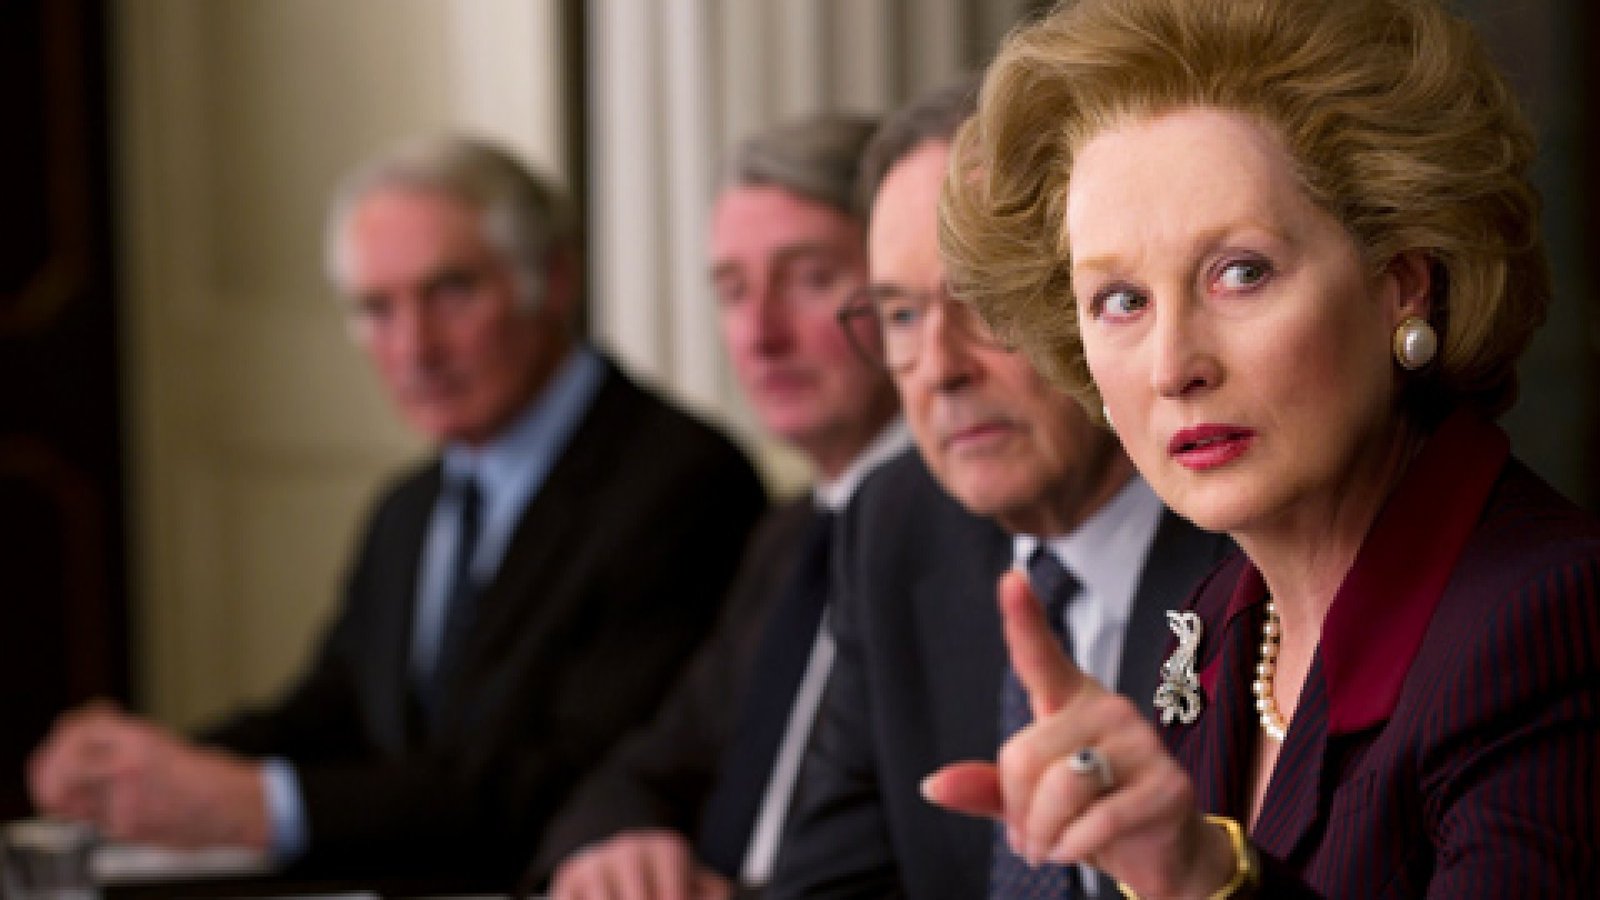 Iron Lady Style: Why Women Want to Look Like Margaret Thatcher